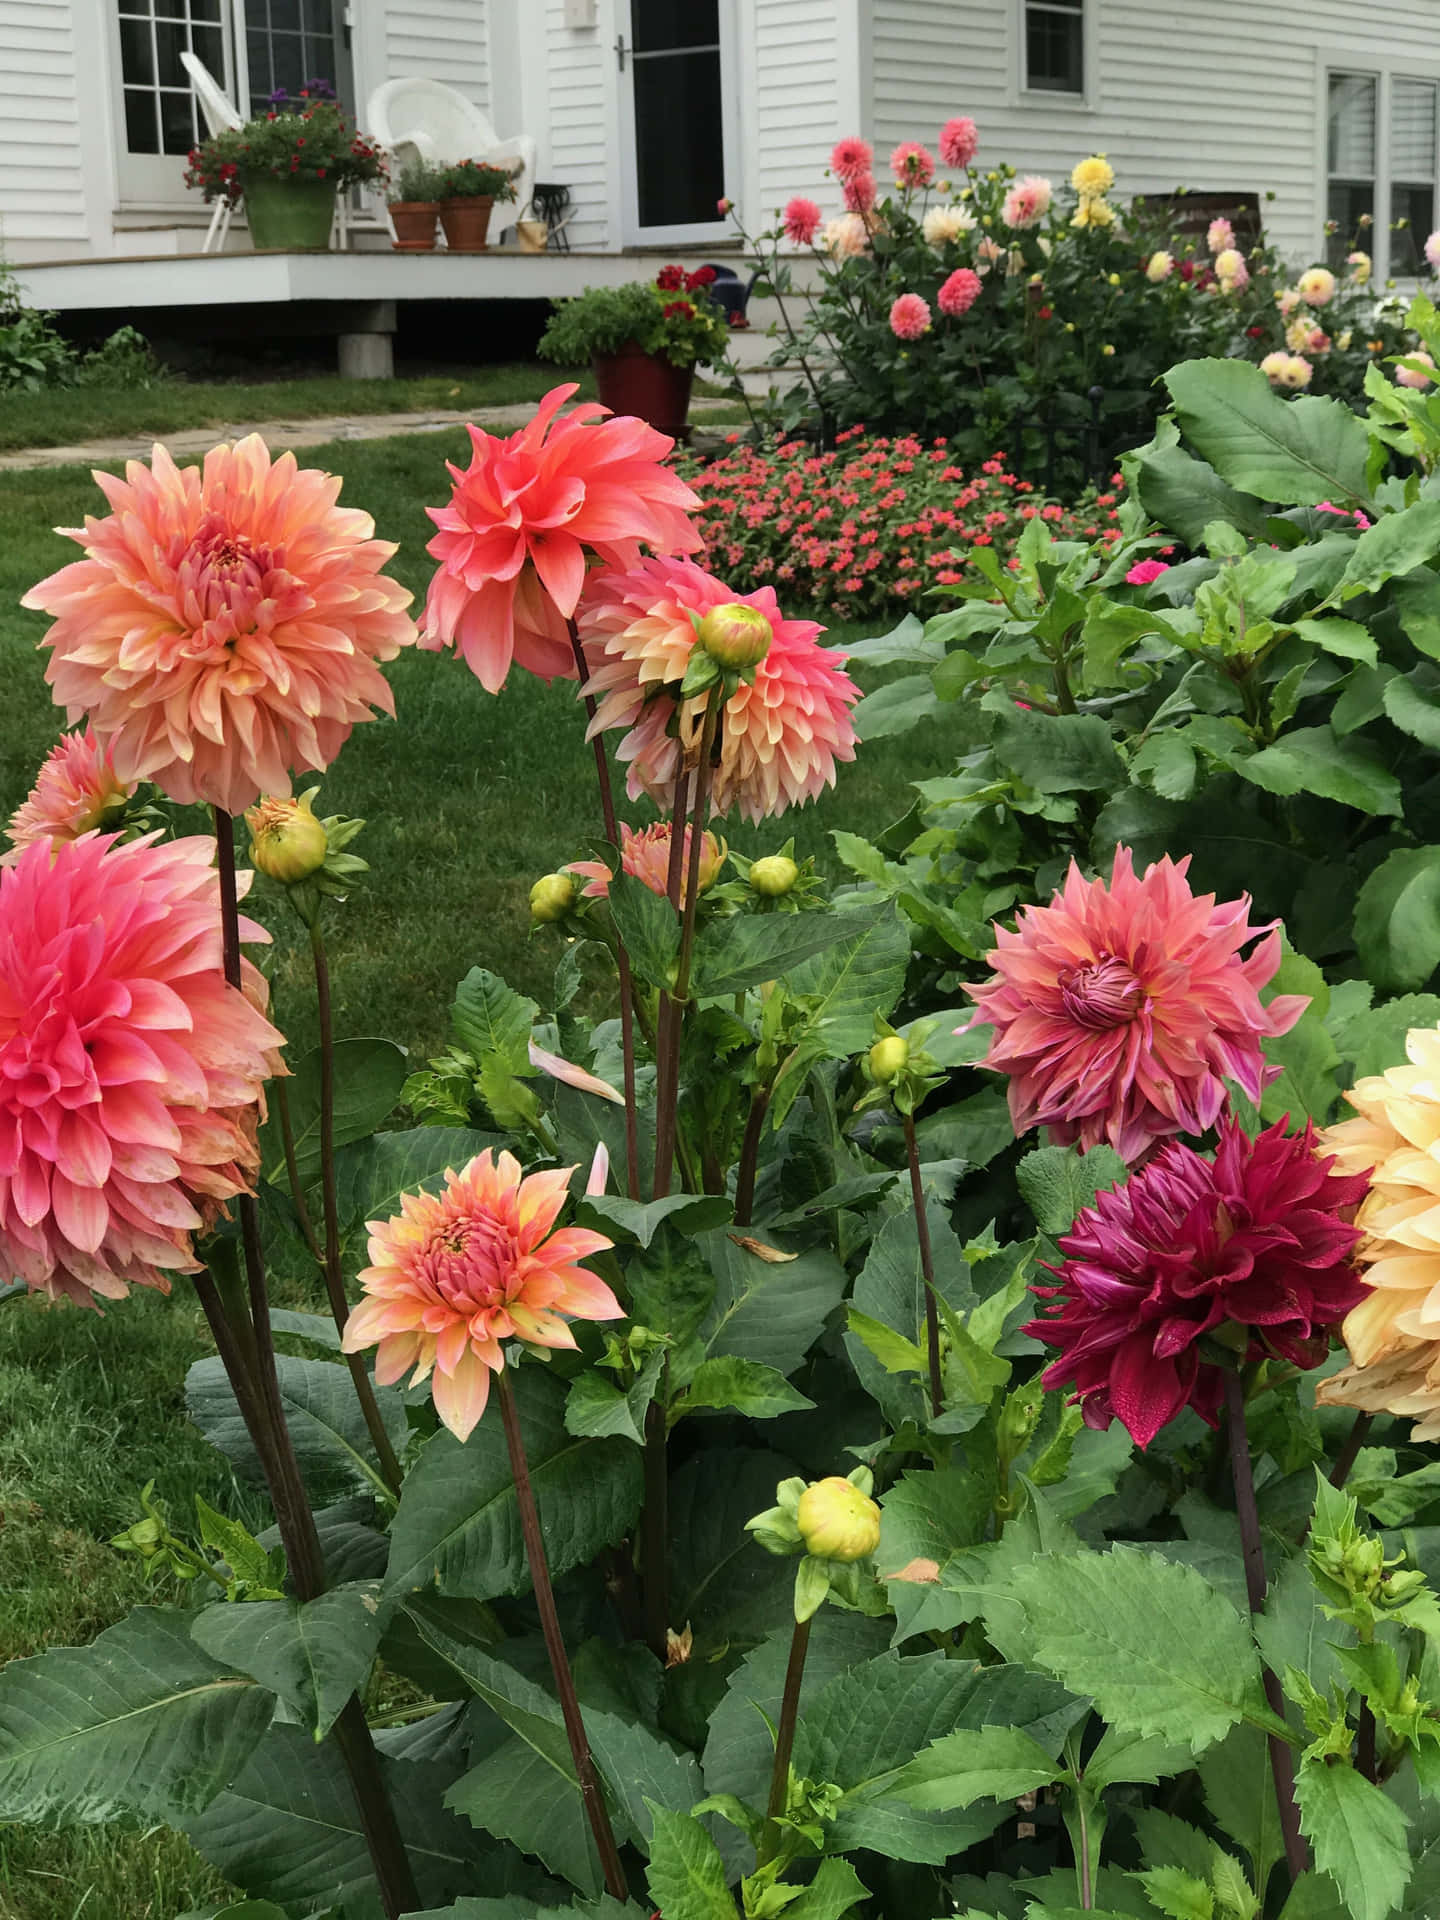 Bright and colourful Dahlia flower bask in the sun.